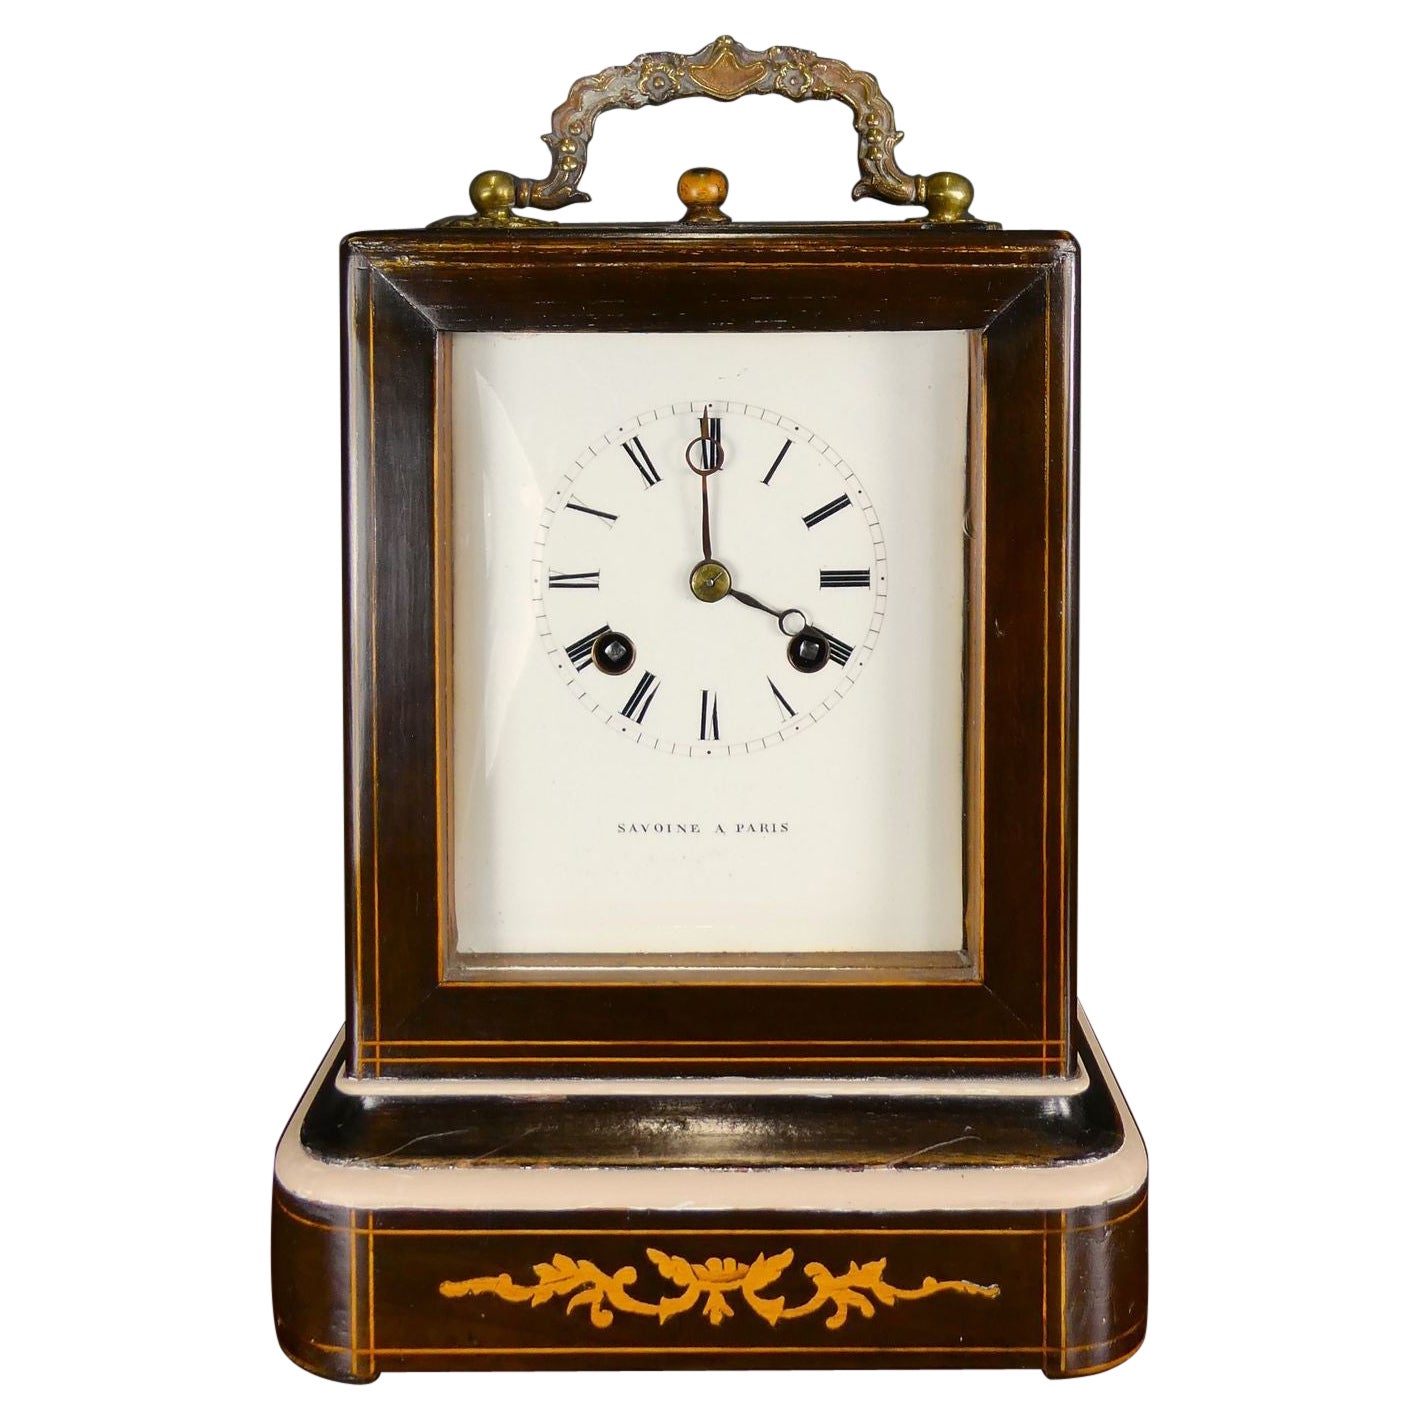 French Rosewood Campaign Clock, Savoine a Paris For Sale